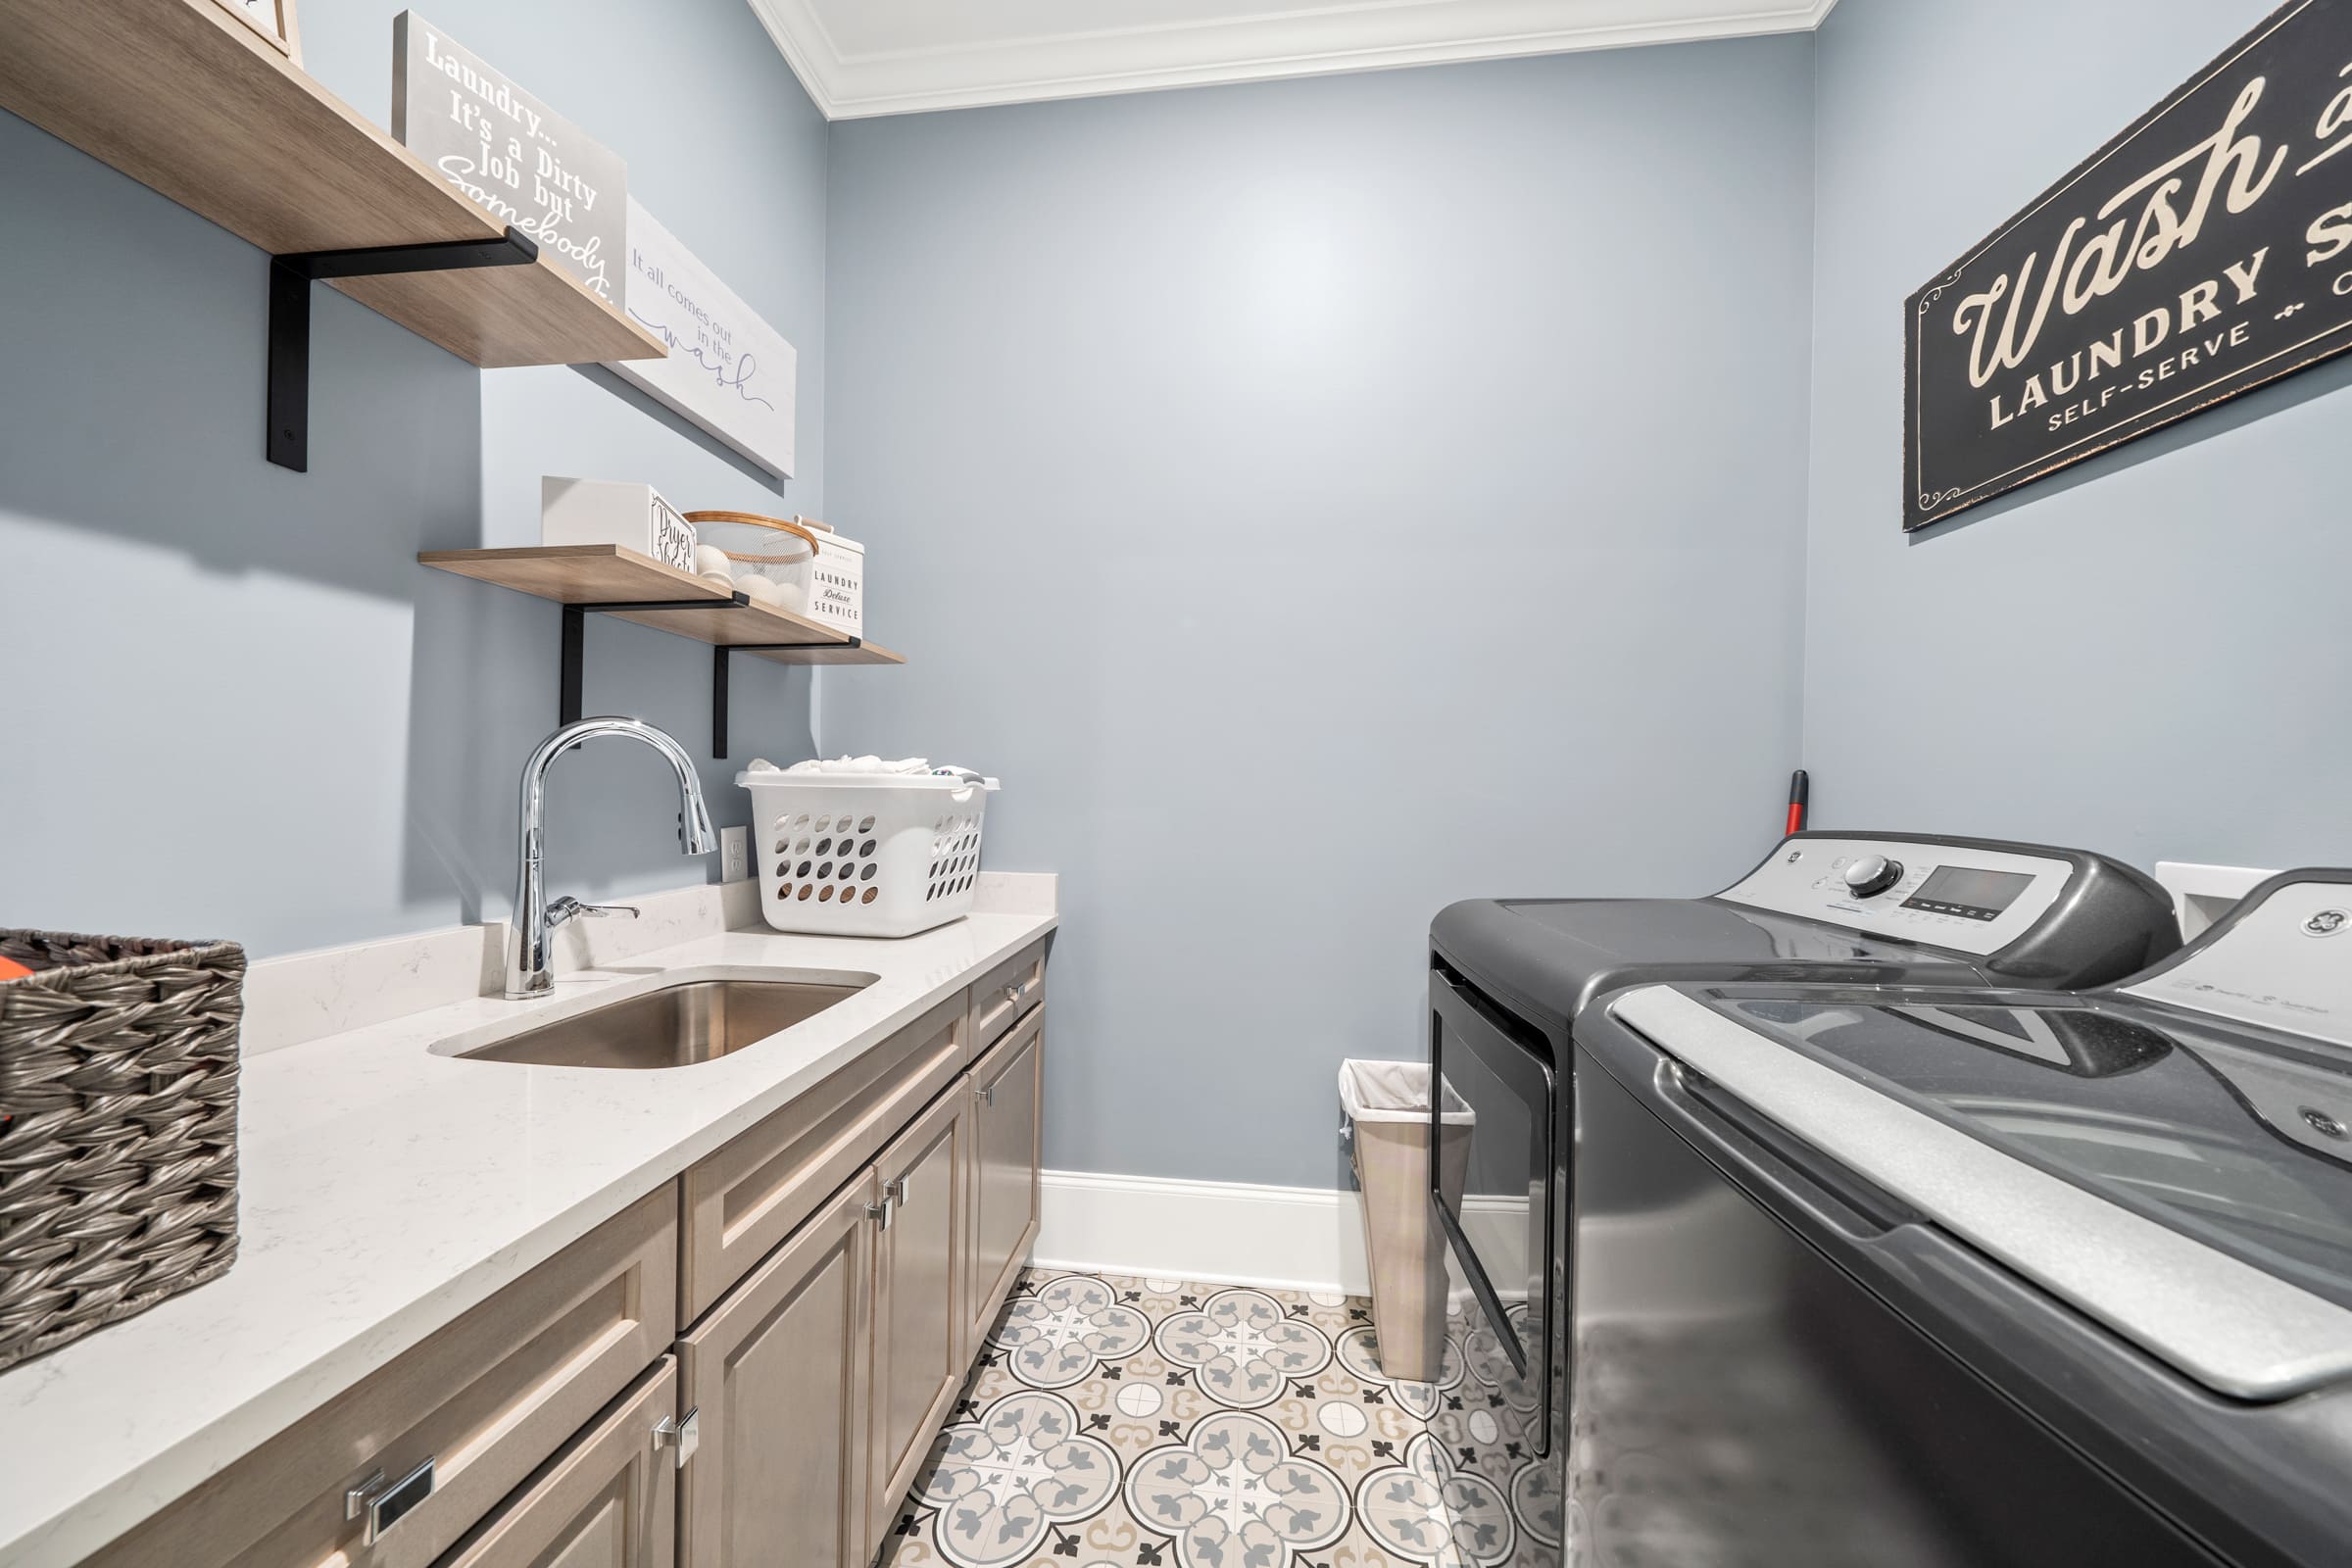 Laundry Room with Floating Shelves for Storage and Easily Accessible Sink |PAXISgroup